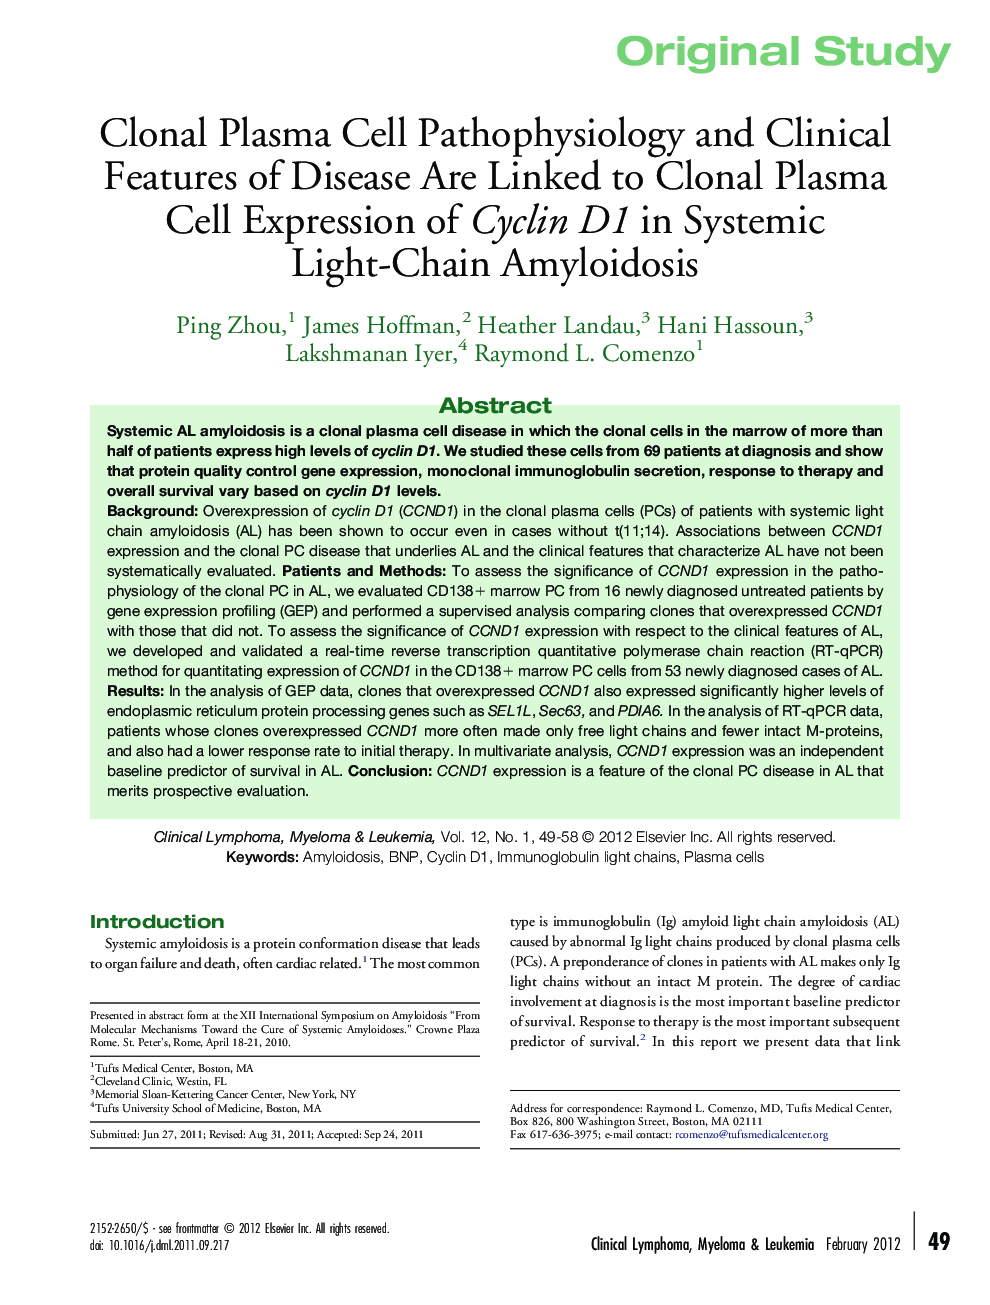 Clonal Plasma Cell Pathophysiology and Clinical Features of Disease Are Linked to Clonal Plasma Cell Expression of Cyclin D1 in Systemic Light-Chain Amyloidosis